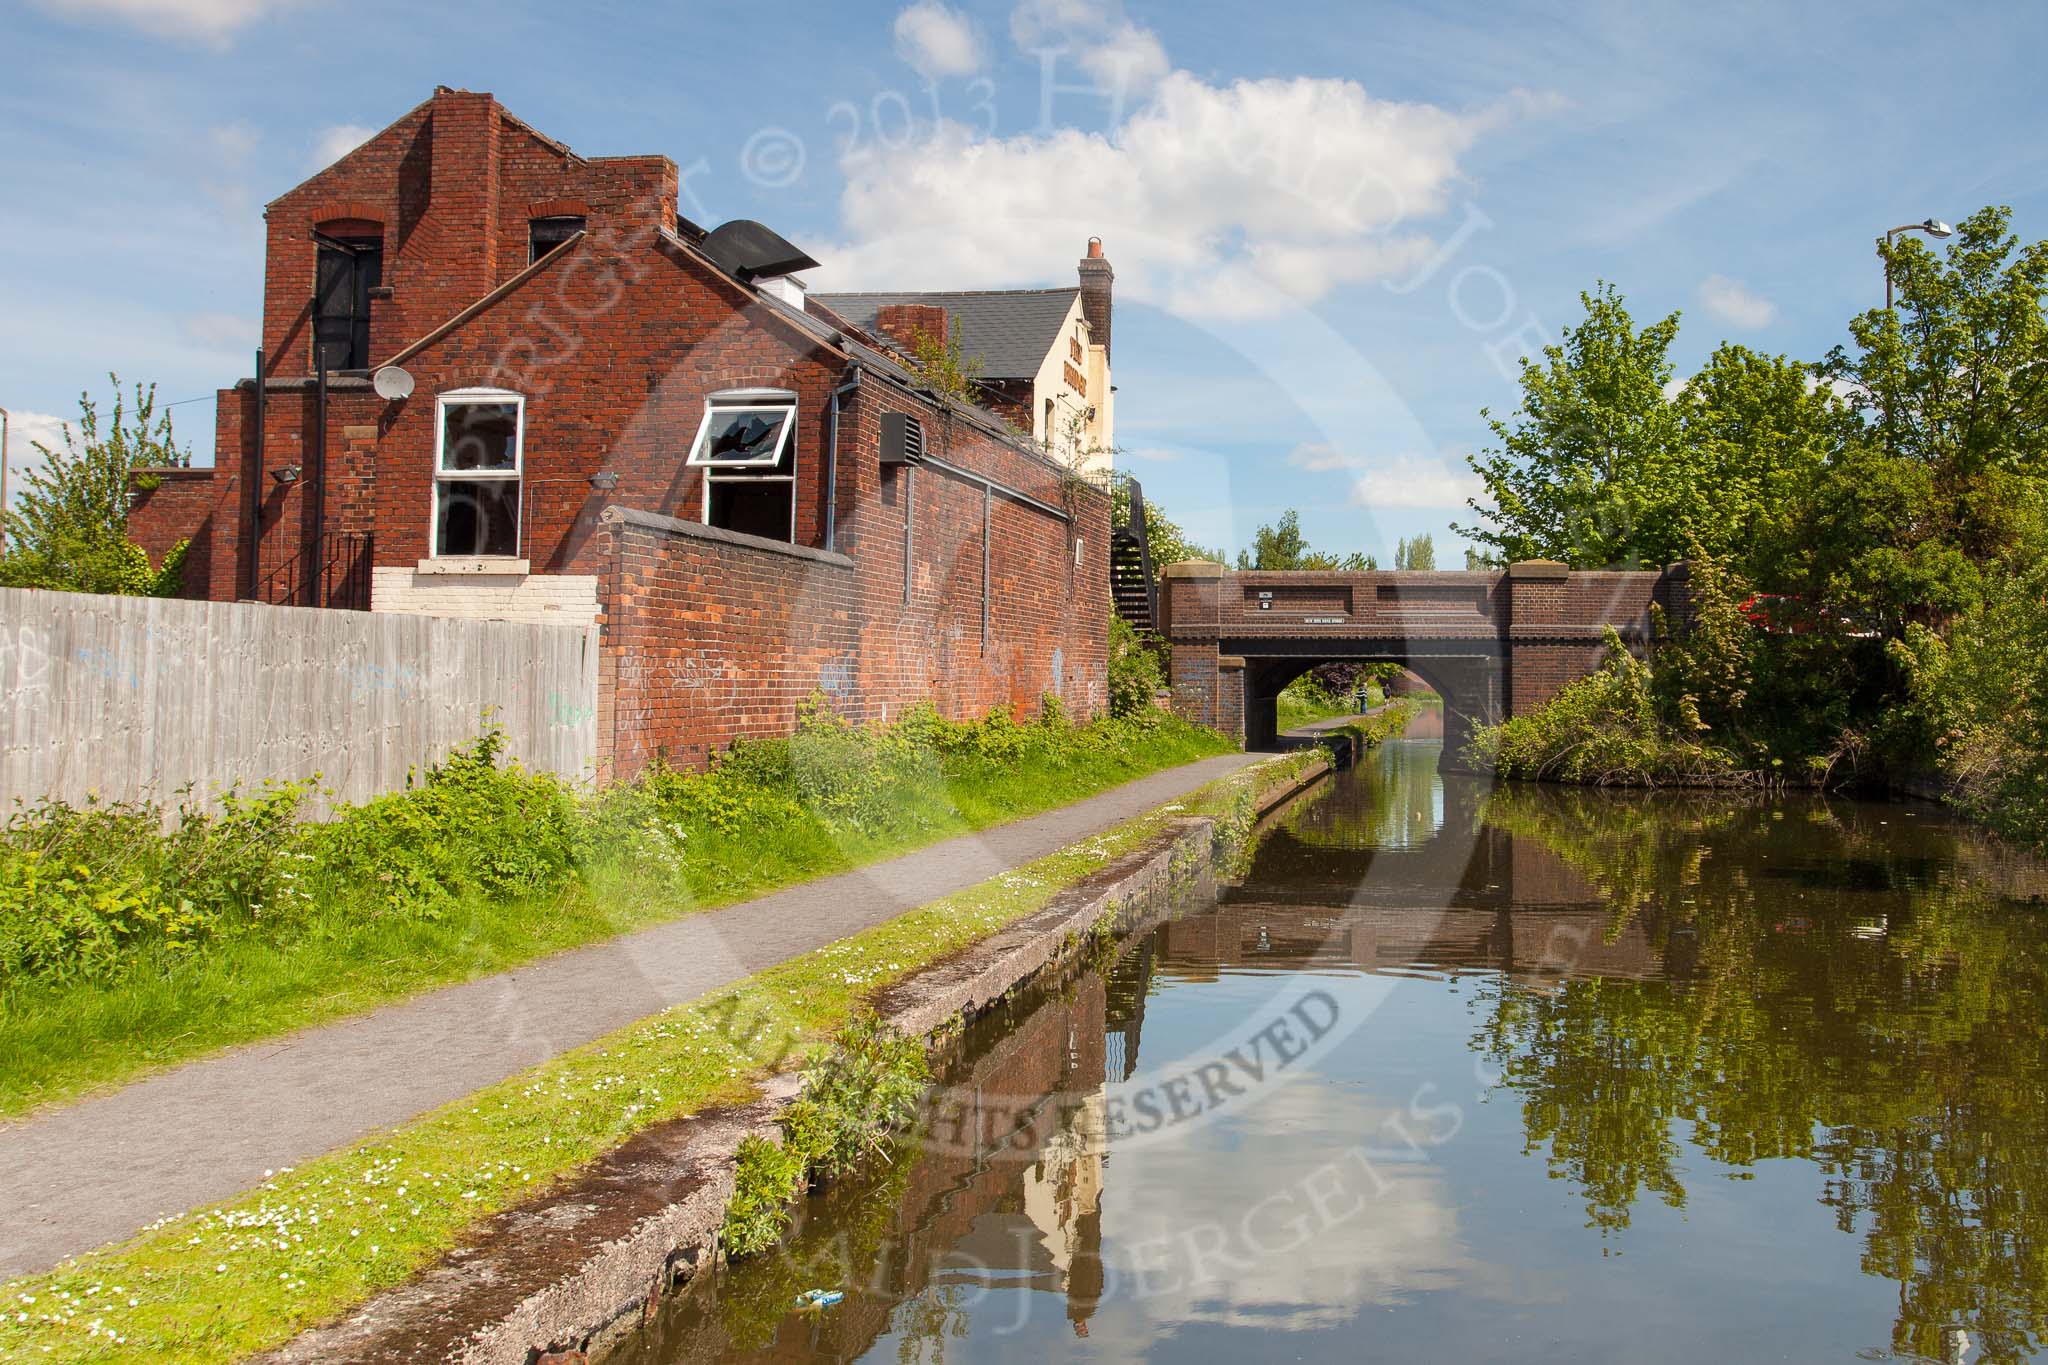 BCN Marathon Challenge 2013: The Titford Canal - "The Bridges" pub next to Langley Green Bridge, another derelict building that might have been served by the canal in the past..
Birmingham Canal Navigation,


United Kingdom,
on 25 May 2013 at 11:35, image #160